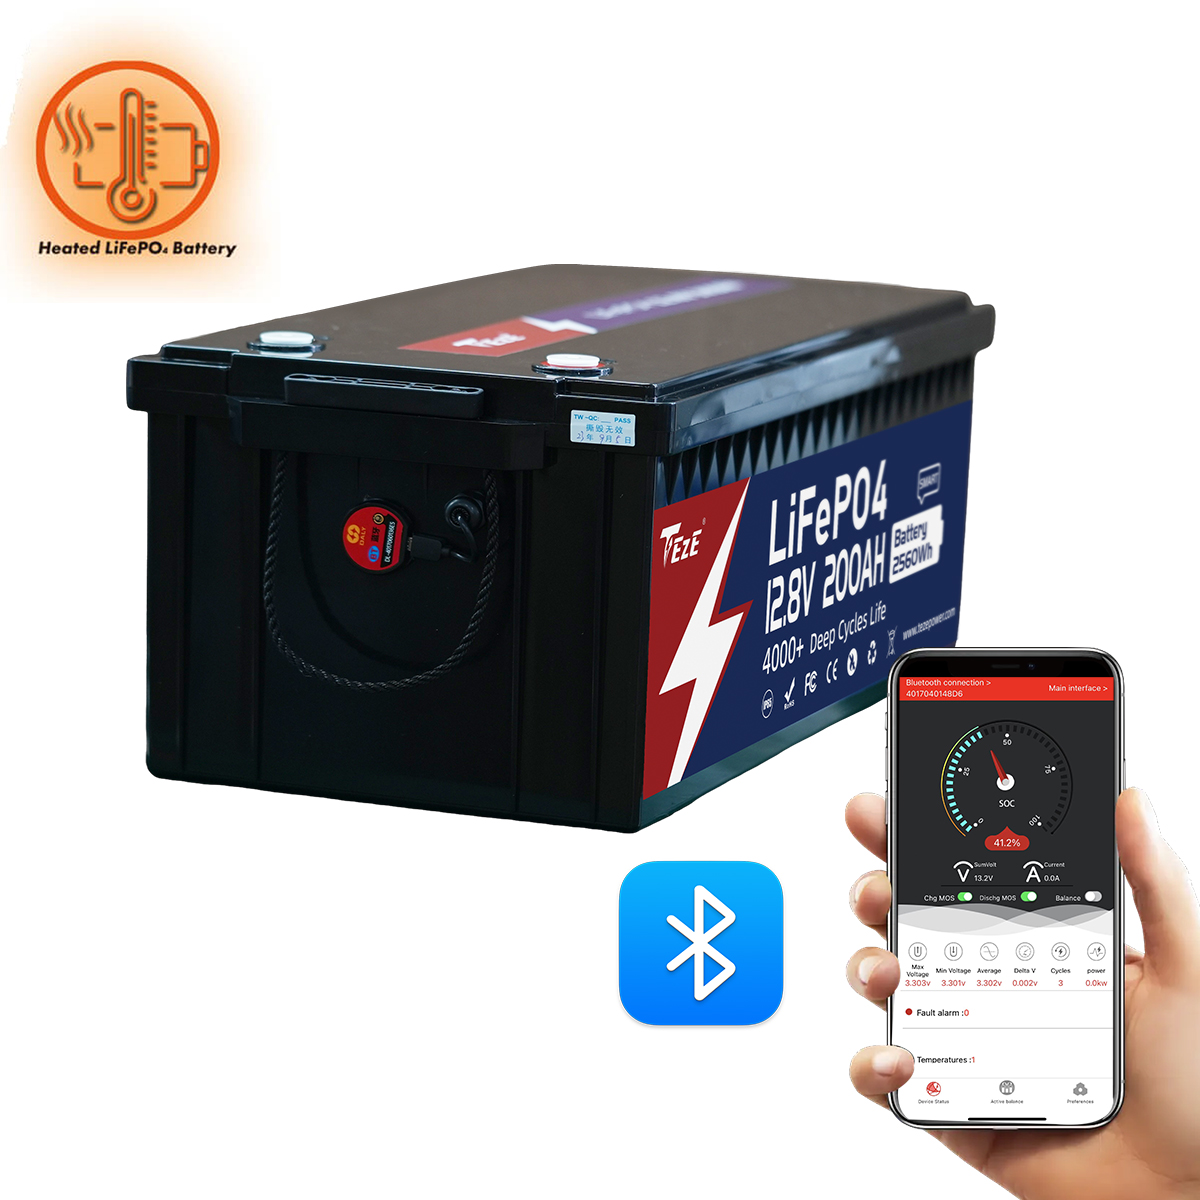 TezePower 12V200Ah LiFePO4 Batterie with Bluetooth, RS485/RS232/CAN Communication Ports, Self-heating and Active Balancer, Built-in 200A Daly BMS (Bluetooth External Version)-TezePower